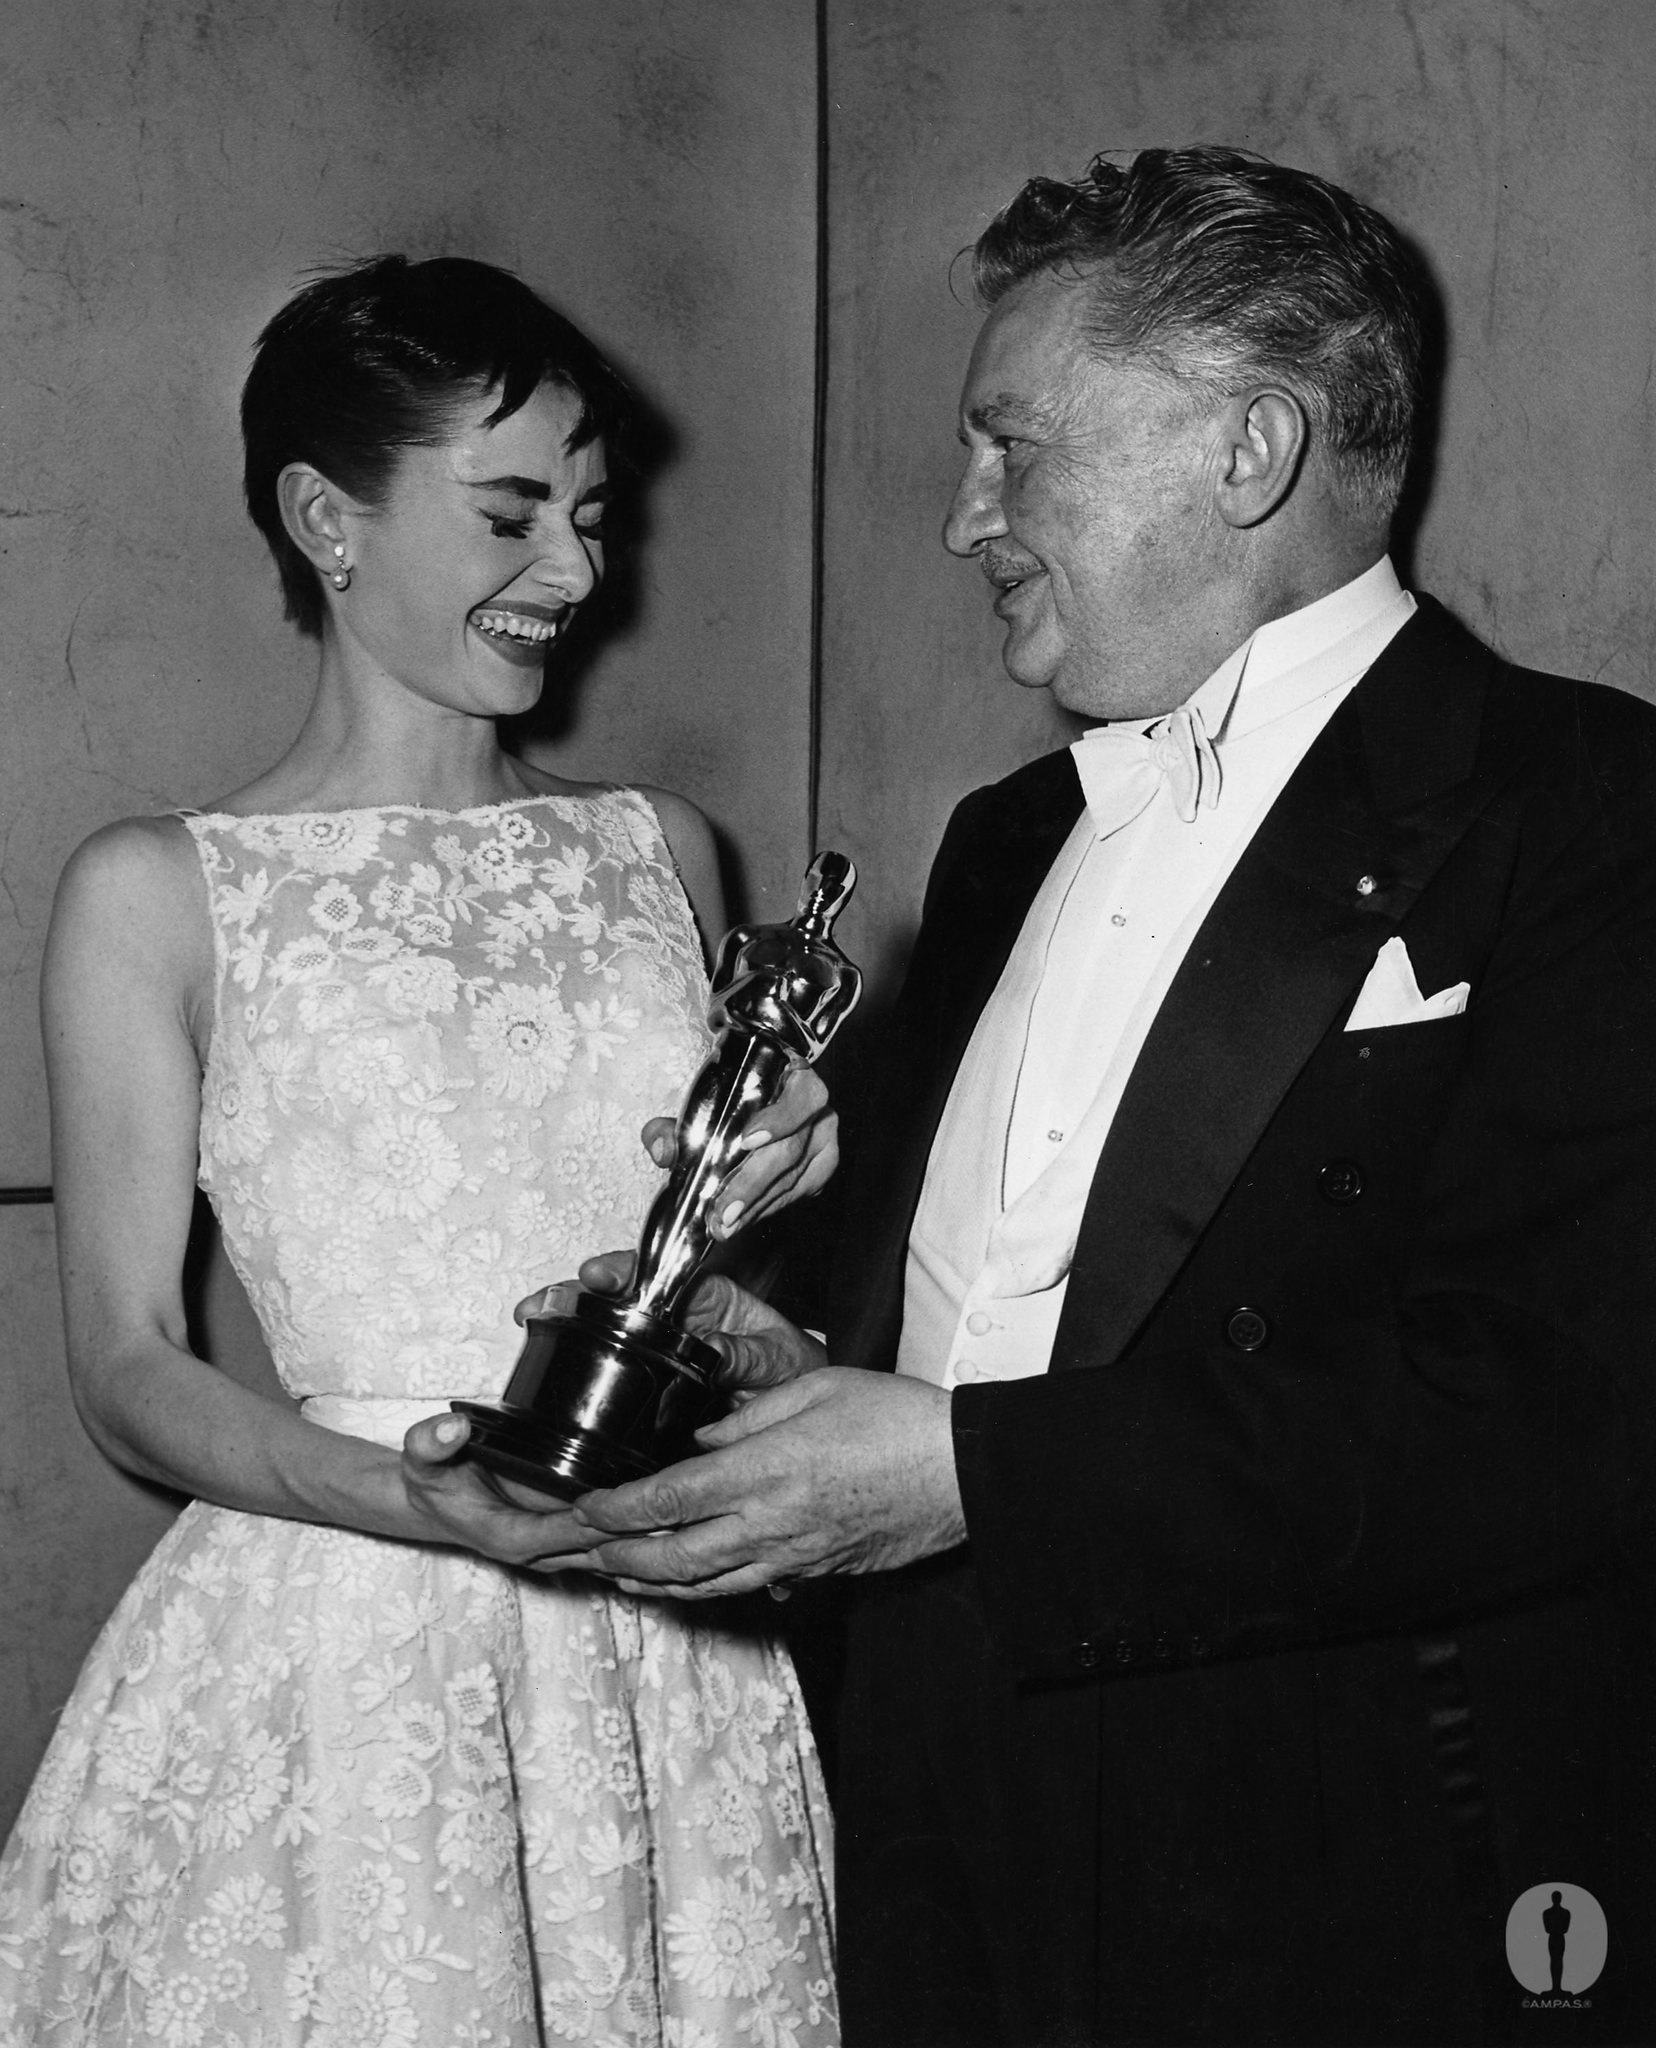 Best Actress Audrey Hepburn (Roman Holiday) with Jean Hersholt at the 26th Academy Awards.